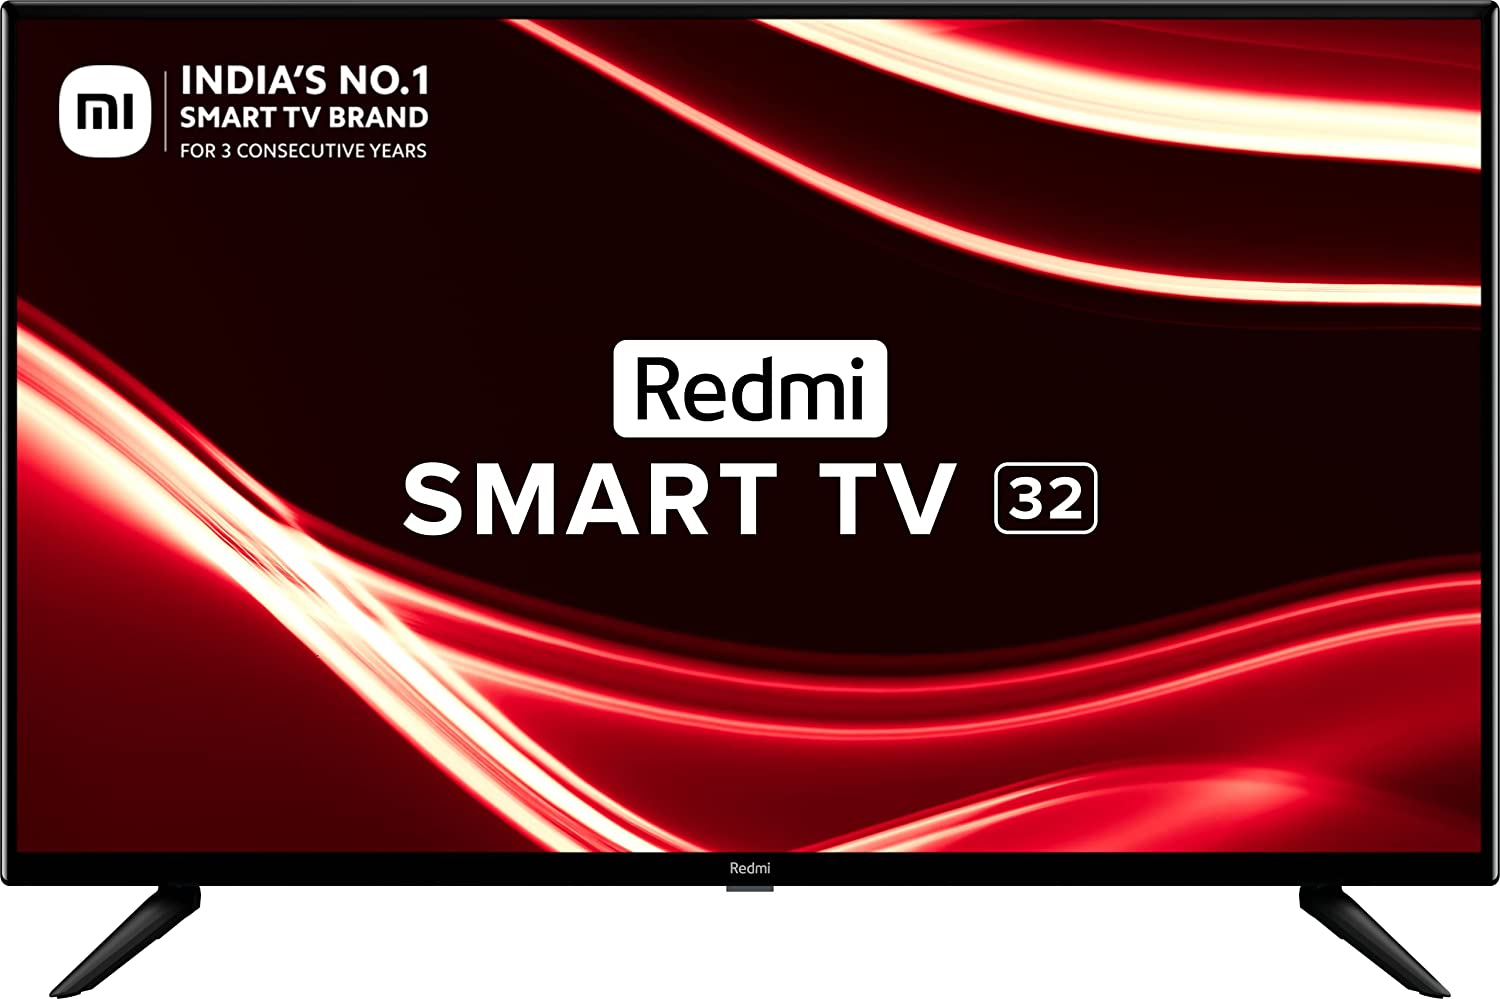 Redmi 80 cm (32 inches) Android 11 Series HD Ready Smart LED TV 